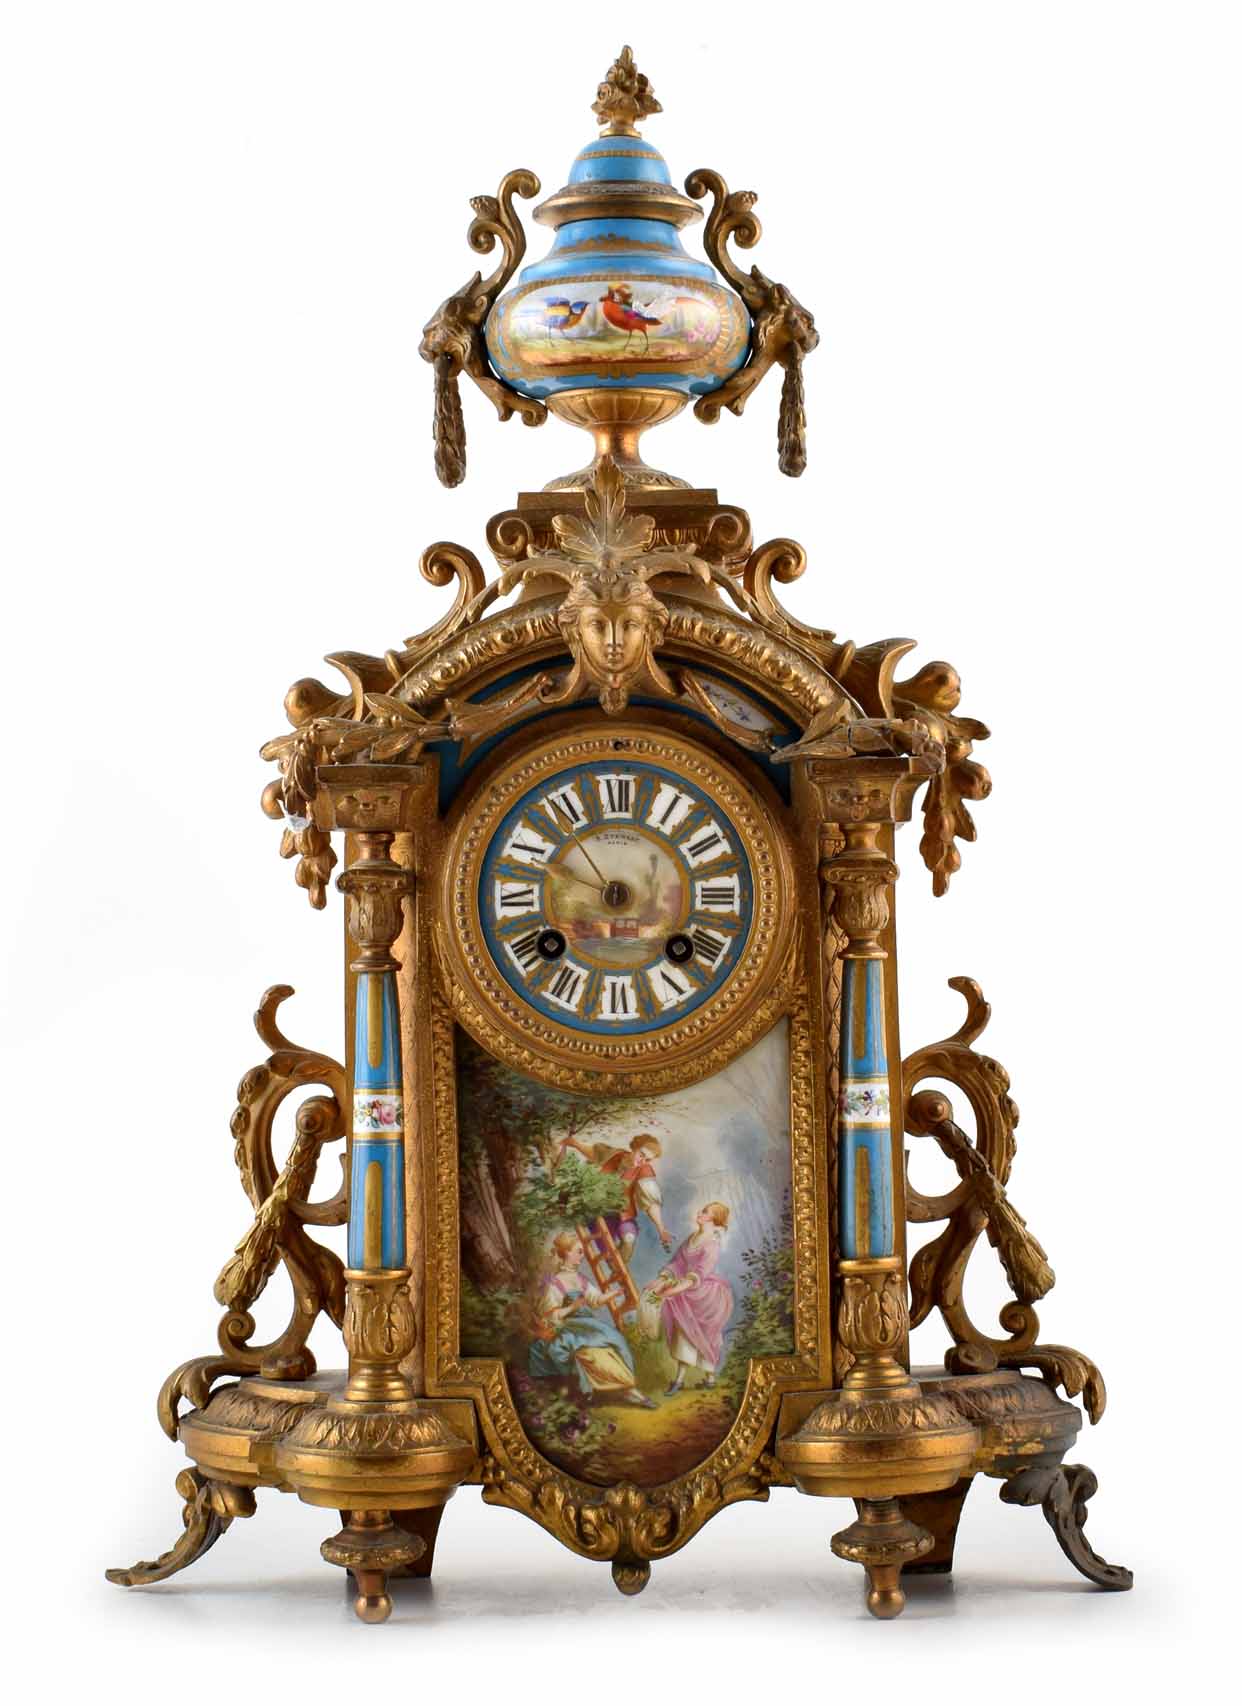 A 19th century French Ormolu mantel clock, with swags of flowers framing a porcelain dial with Roman